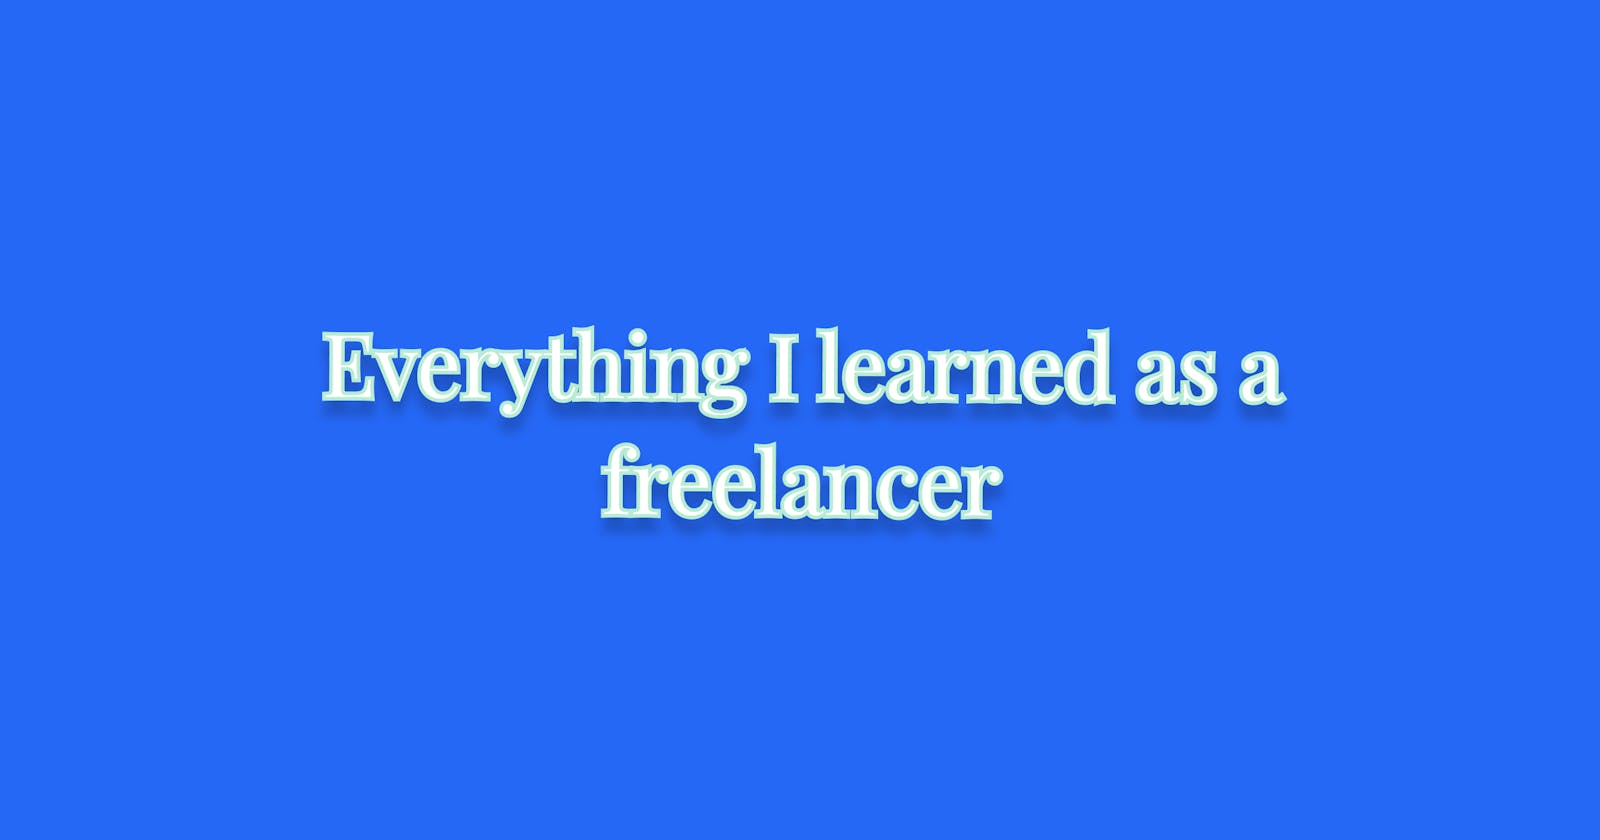 Everything I learned as a freelancer